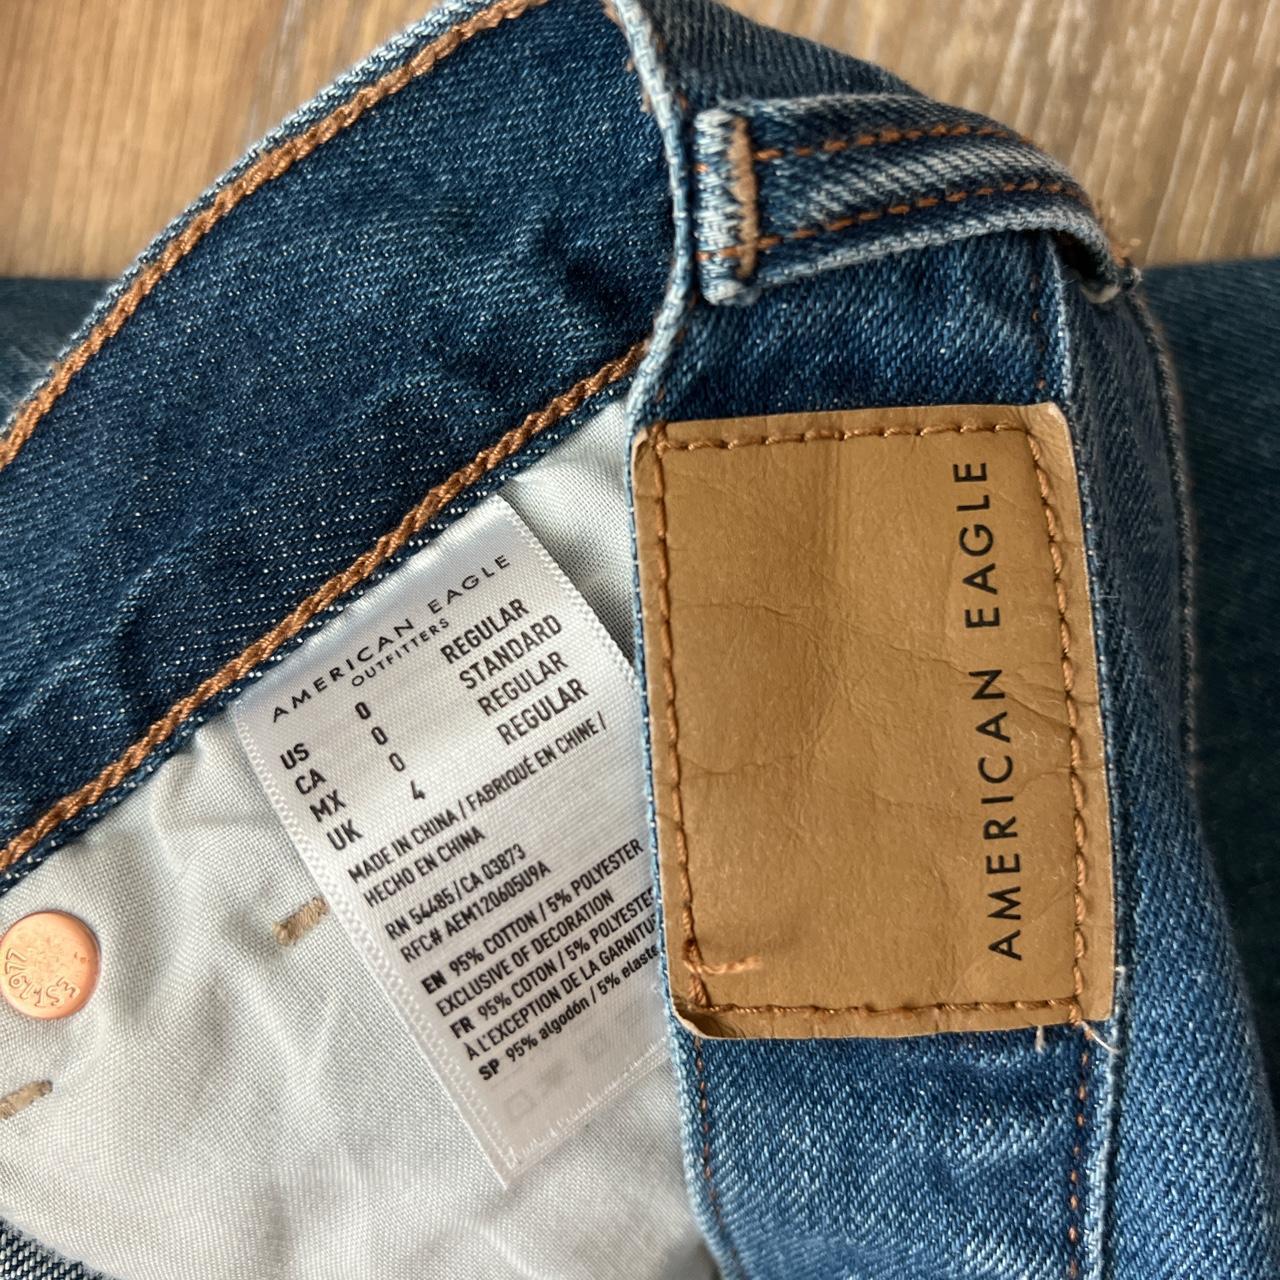 American Eagle Outfitters Women's Blue and Navy Jeans | Depop